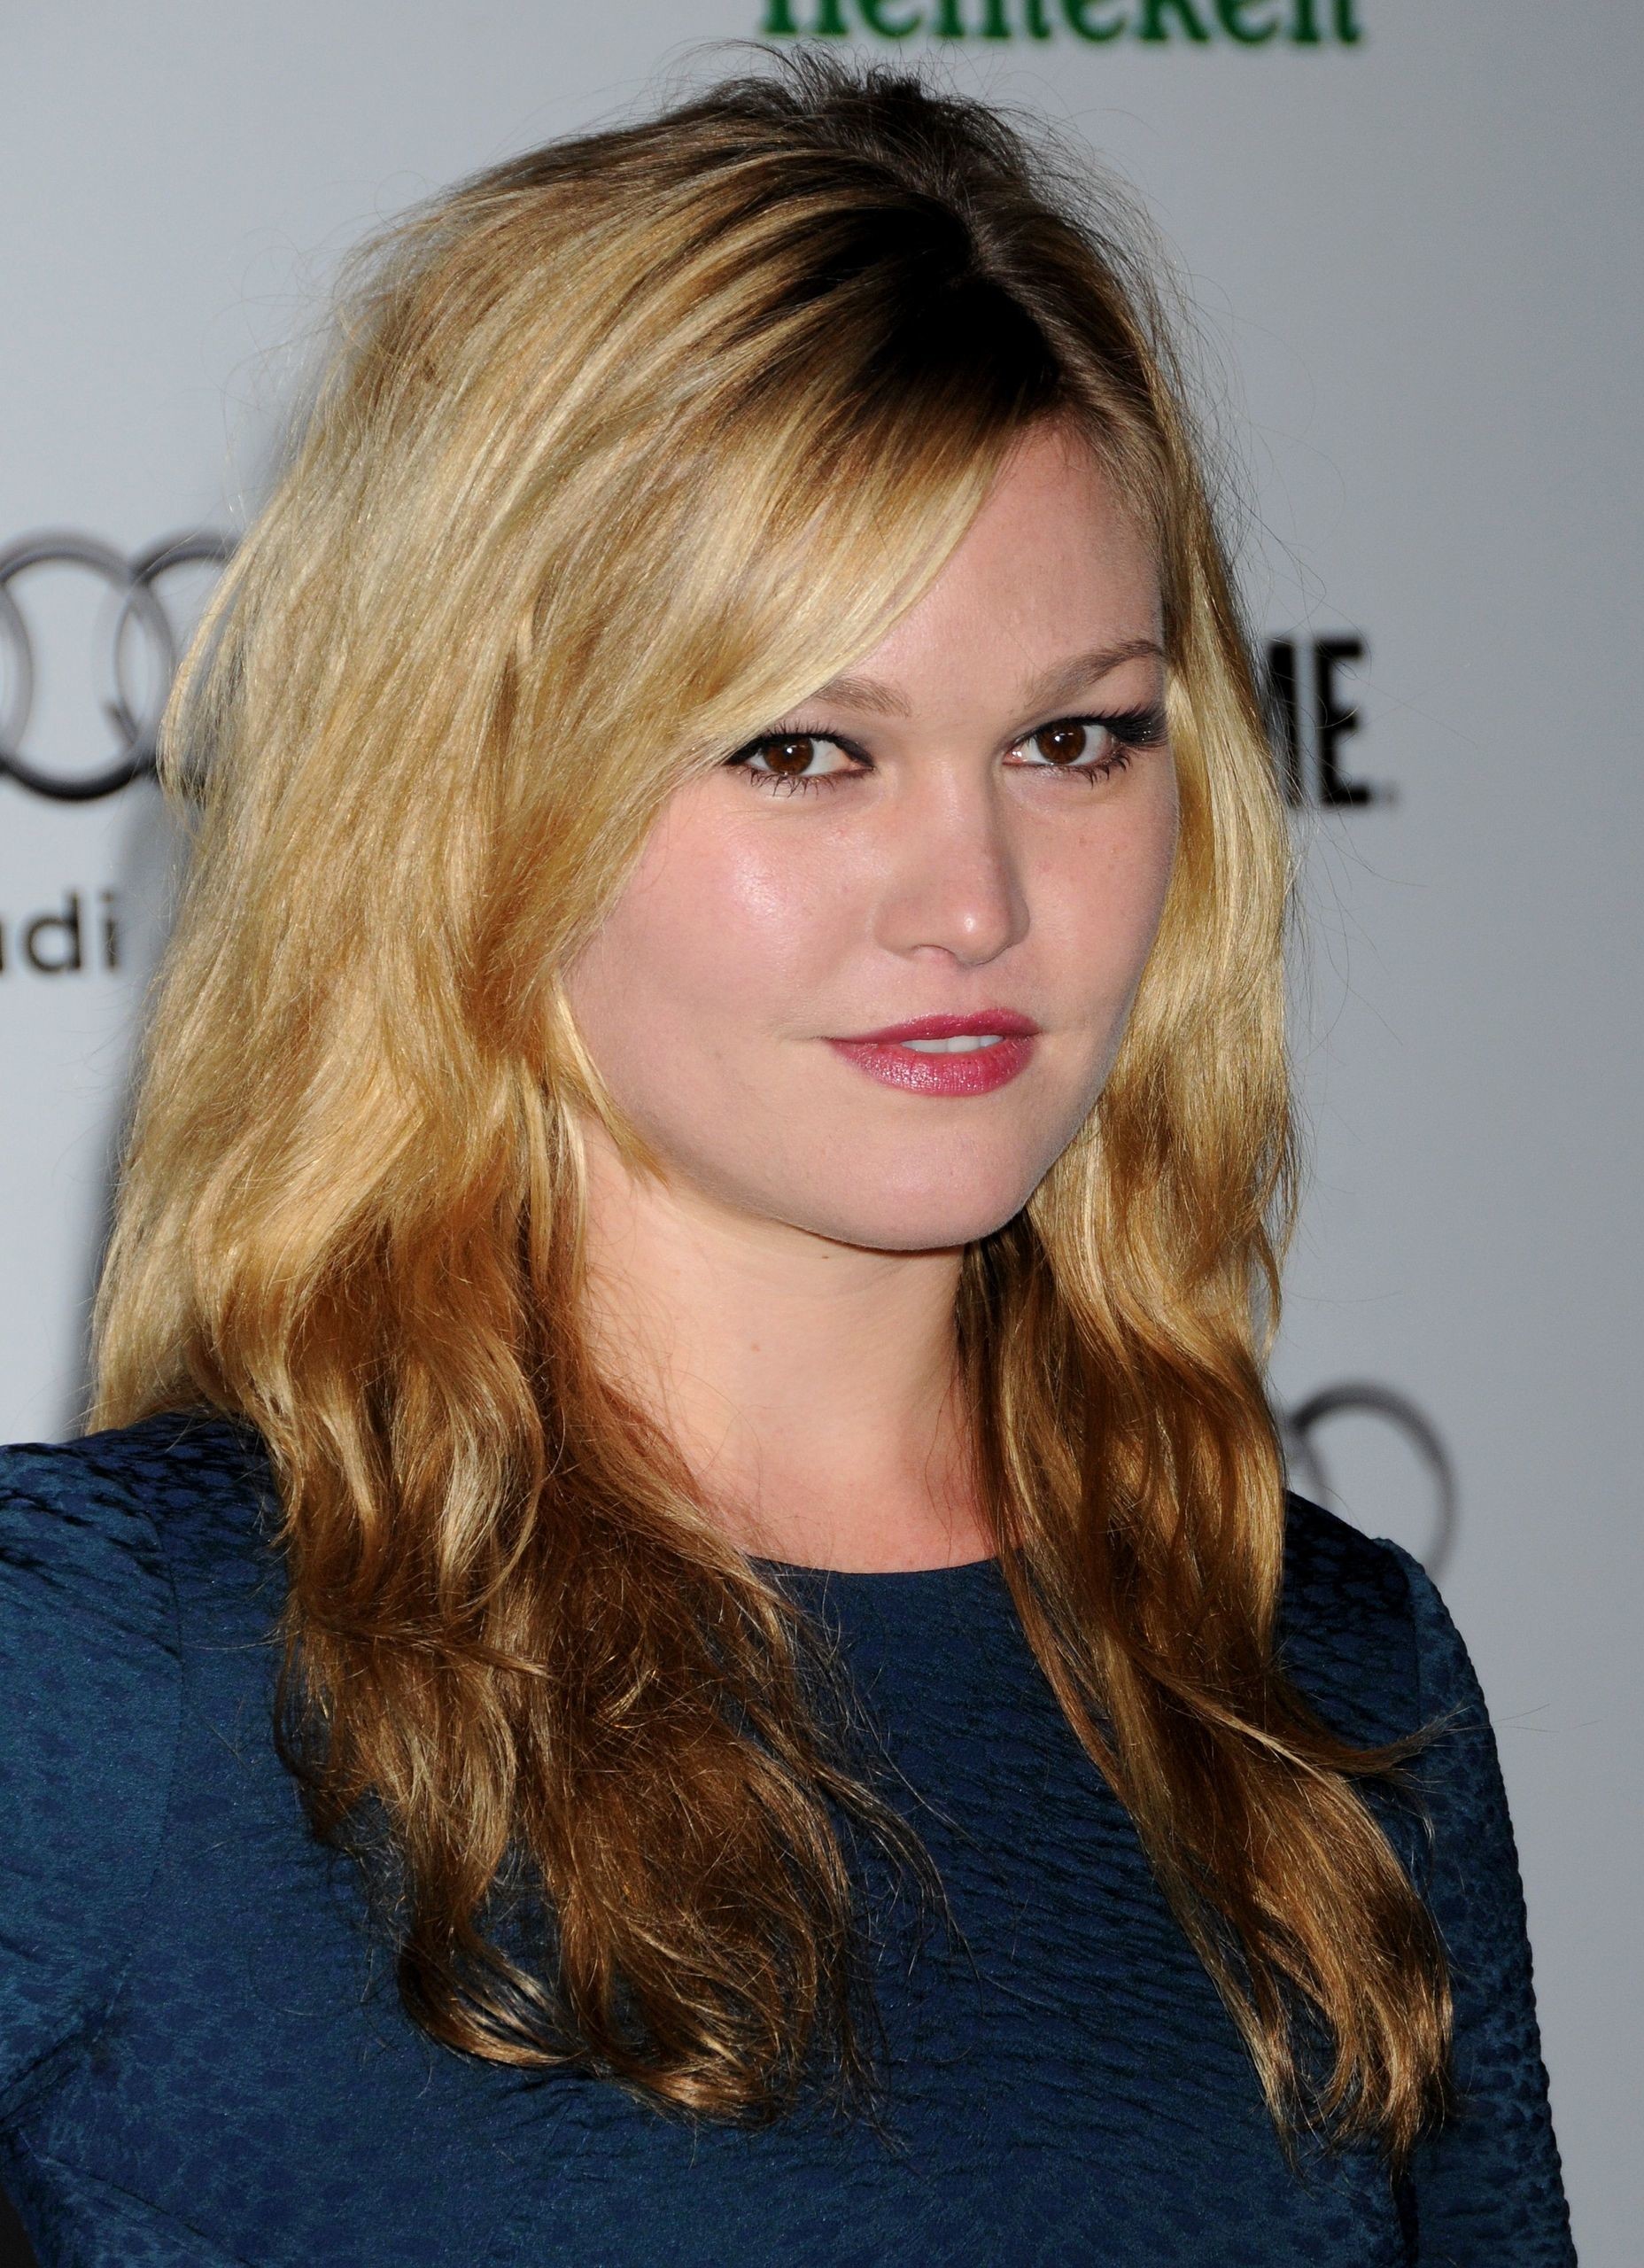 julia stiles wallpapers images photos pictures backgrounds on julia stiles wallpaper